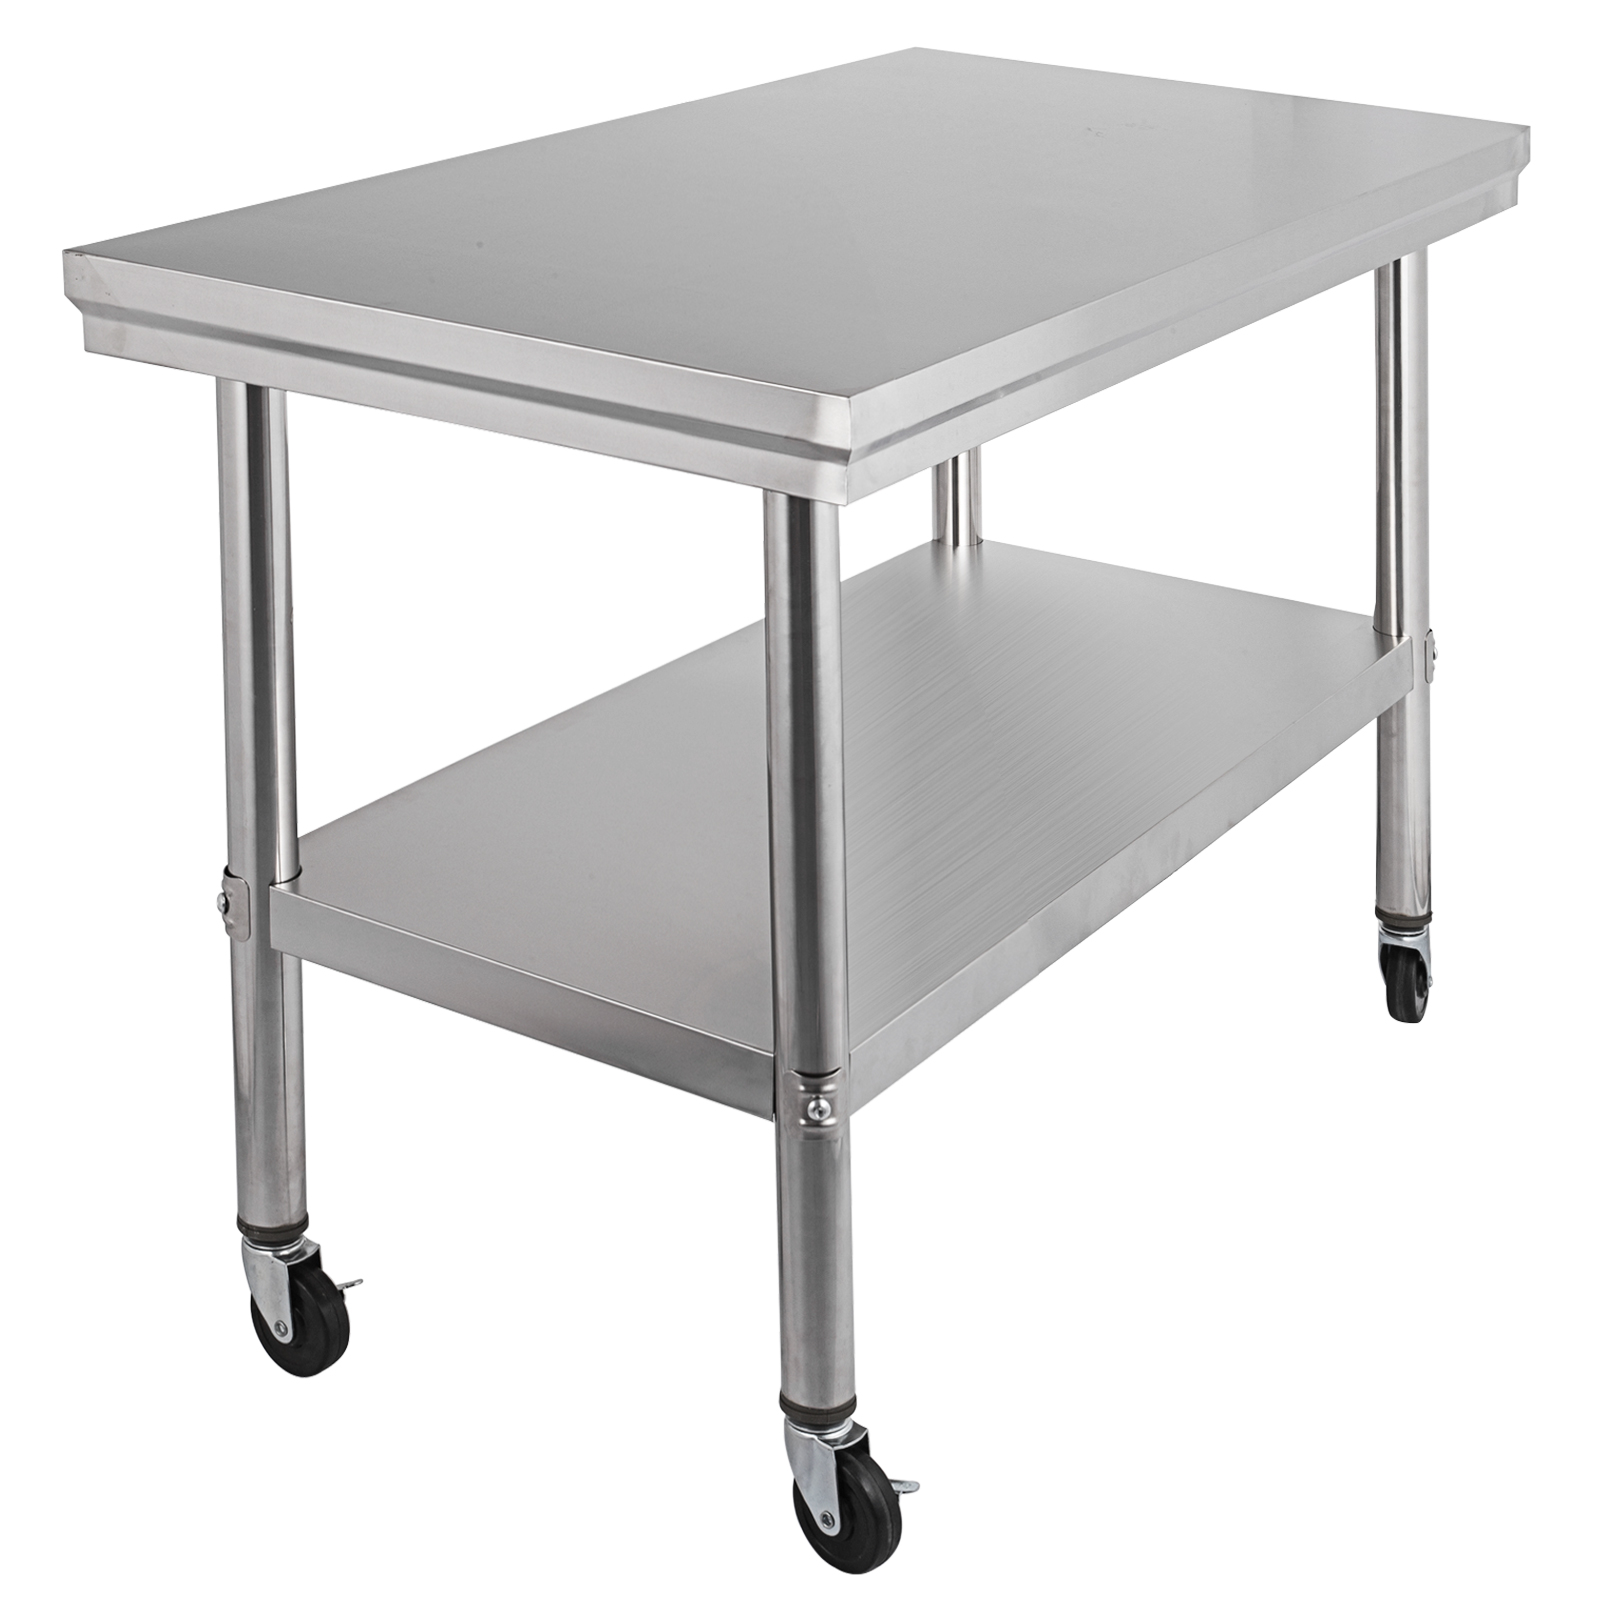 Commercial 30" x 24" Stainless Steel Work Prep Table With 4 Wheels Stainless Steel Prep Table With Wheels